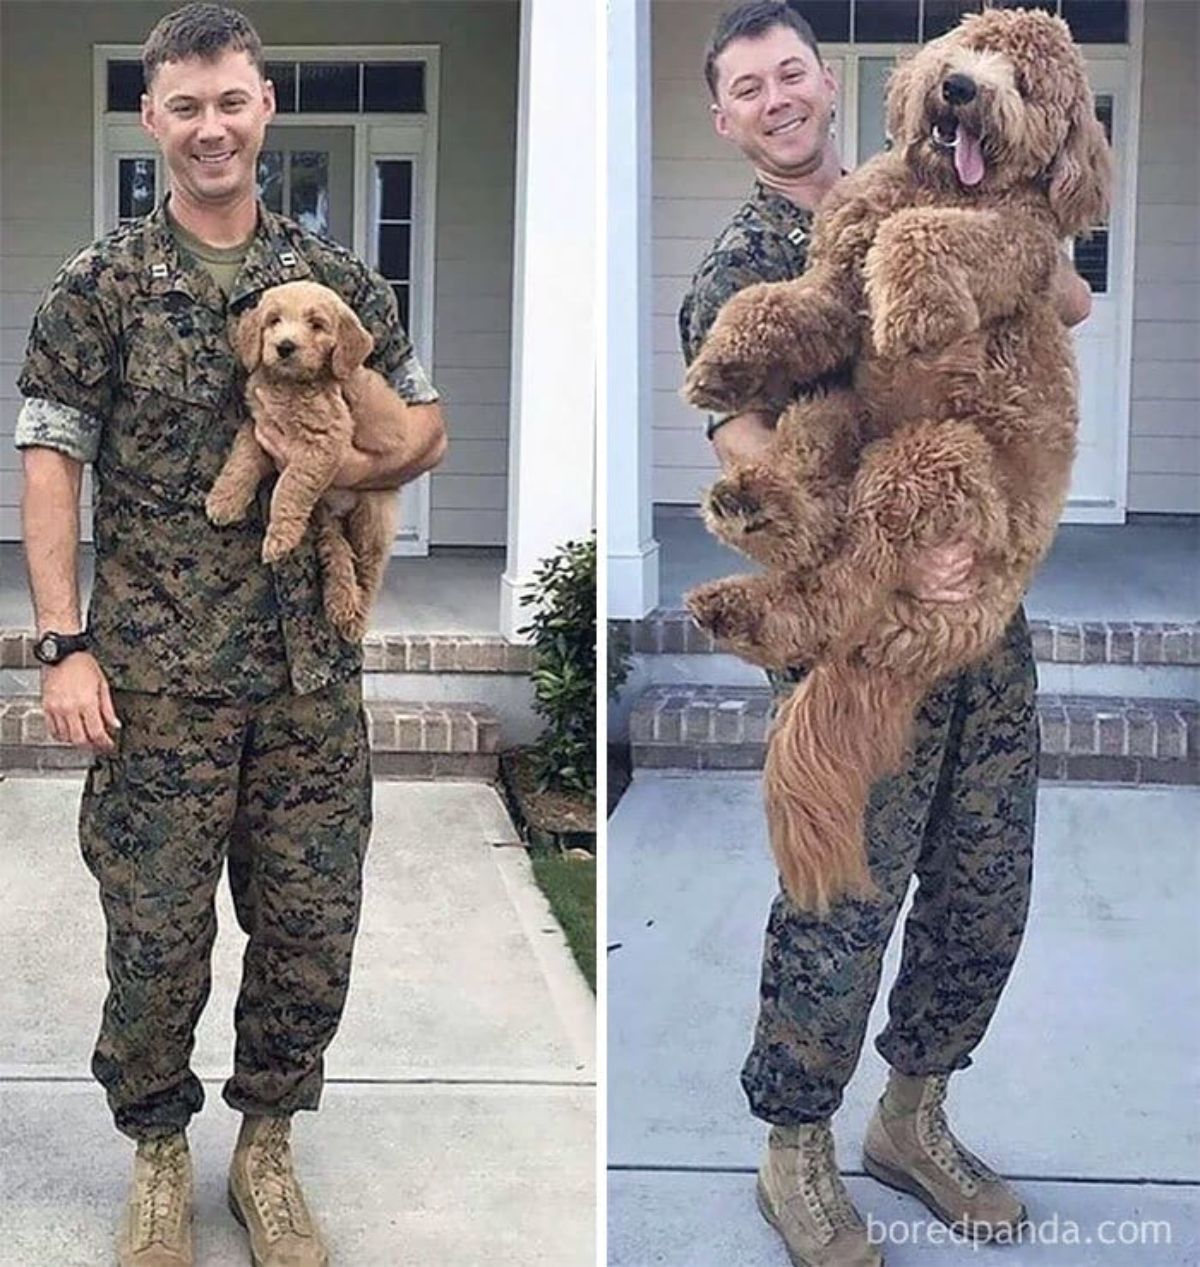 brown poodle being held by a soldier